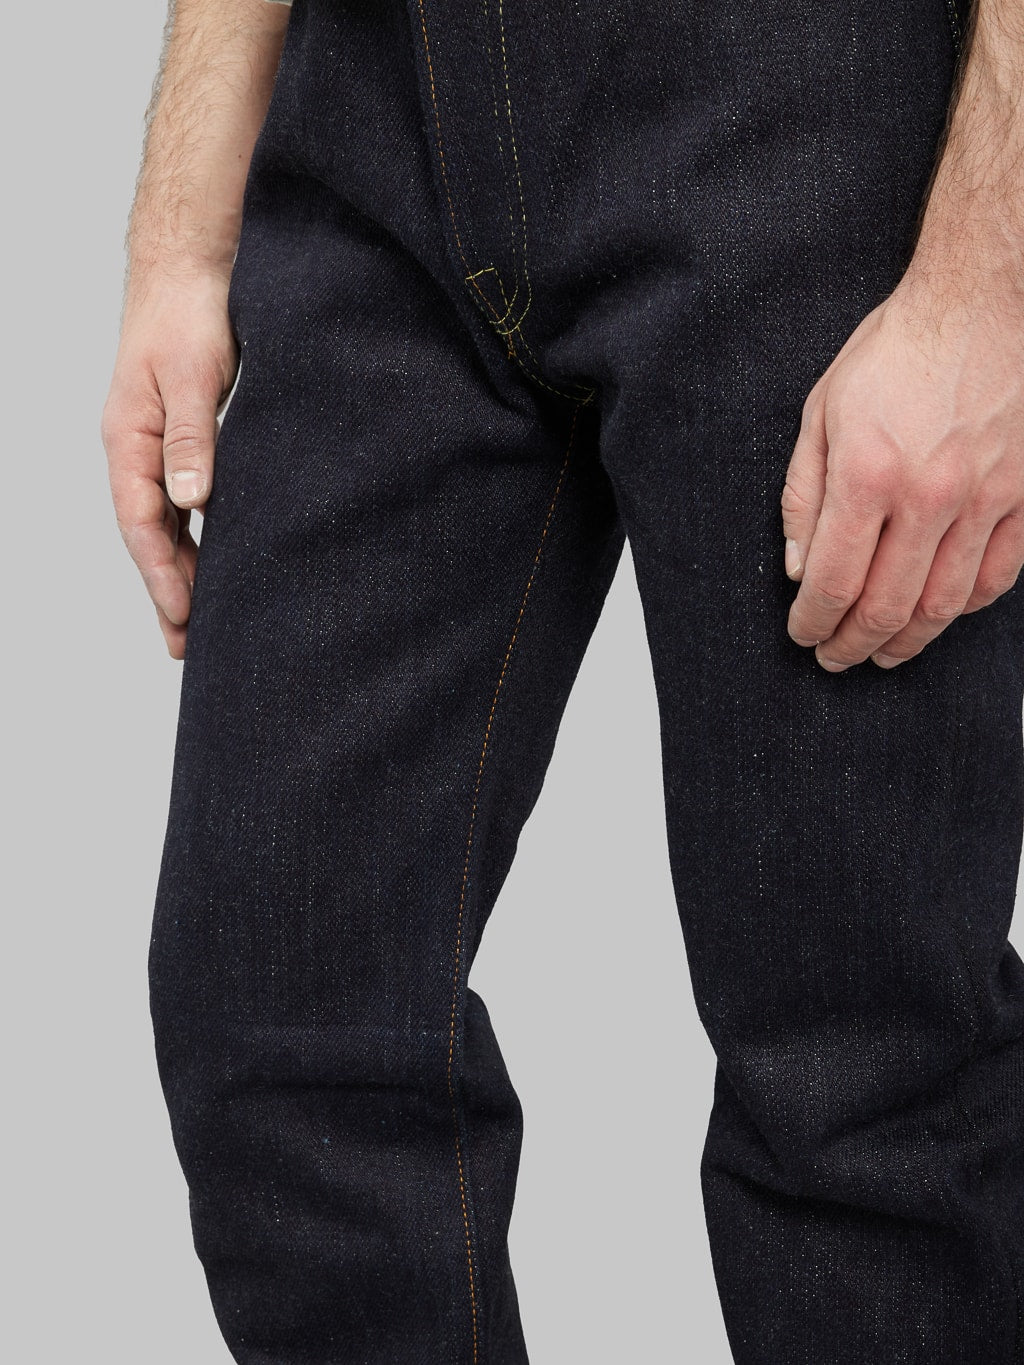 The Strike Gold Extra Heavyweight regular straight jeans front rise